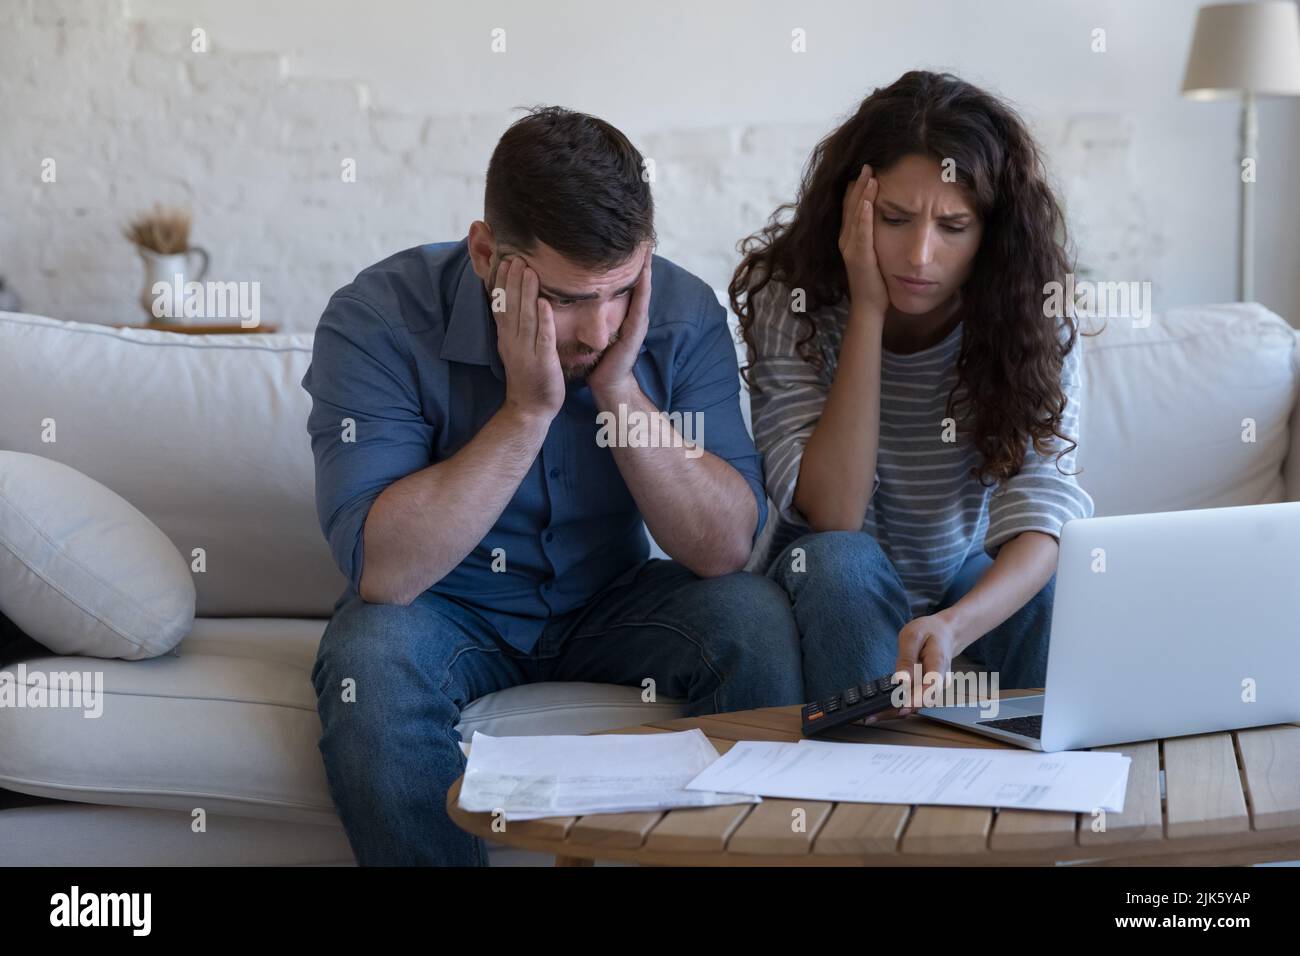 Concerned upset millennial couple counting overspent budget Stock Photo